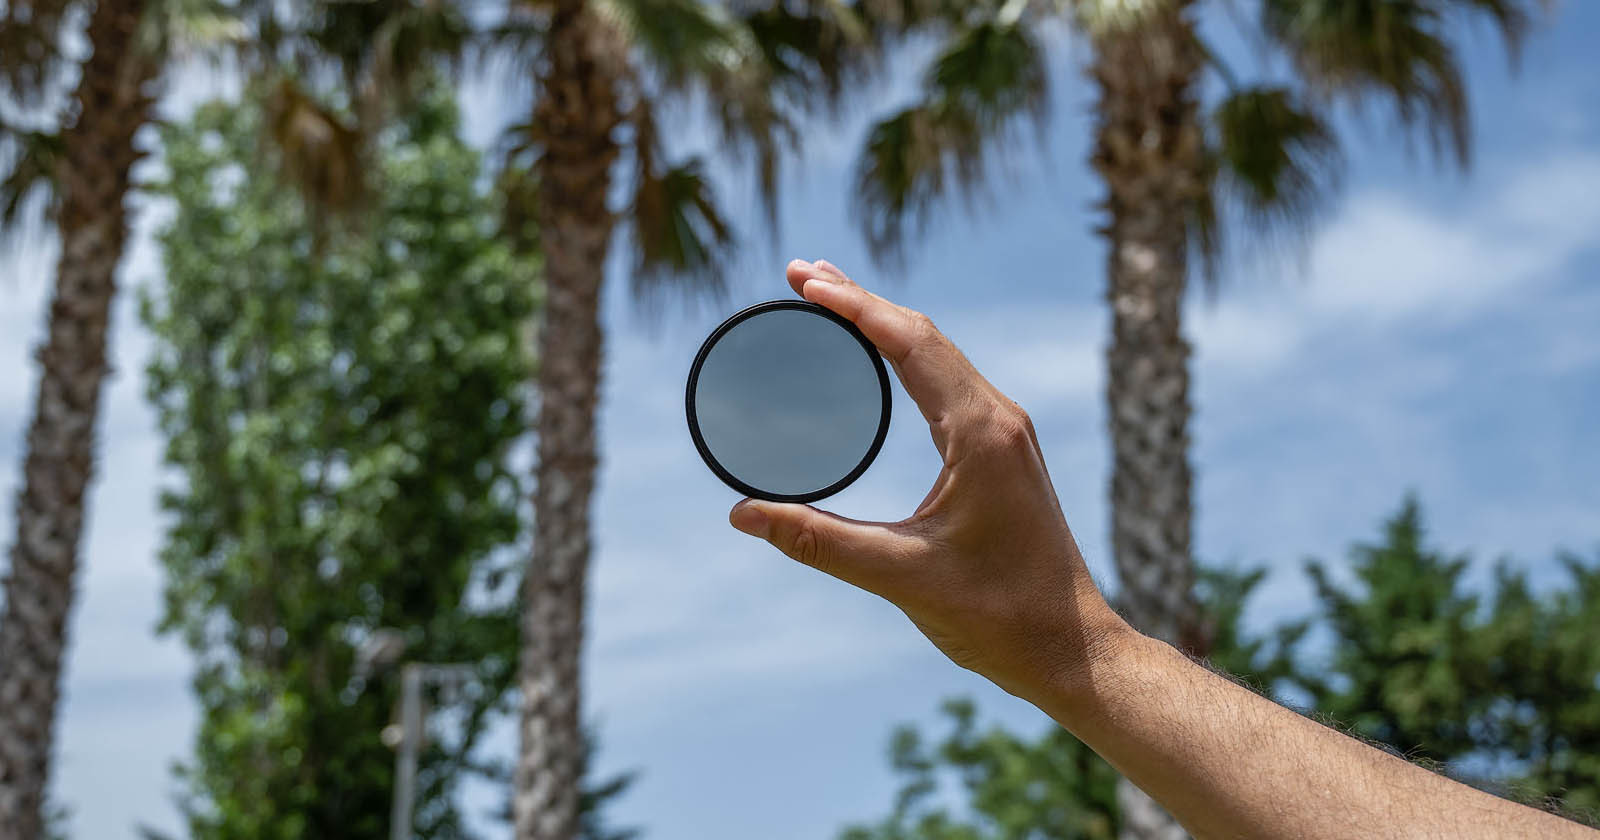 CPL Filter: Why, When, and How to Use a Circular Polarizer